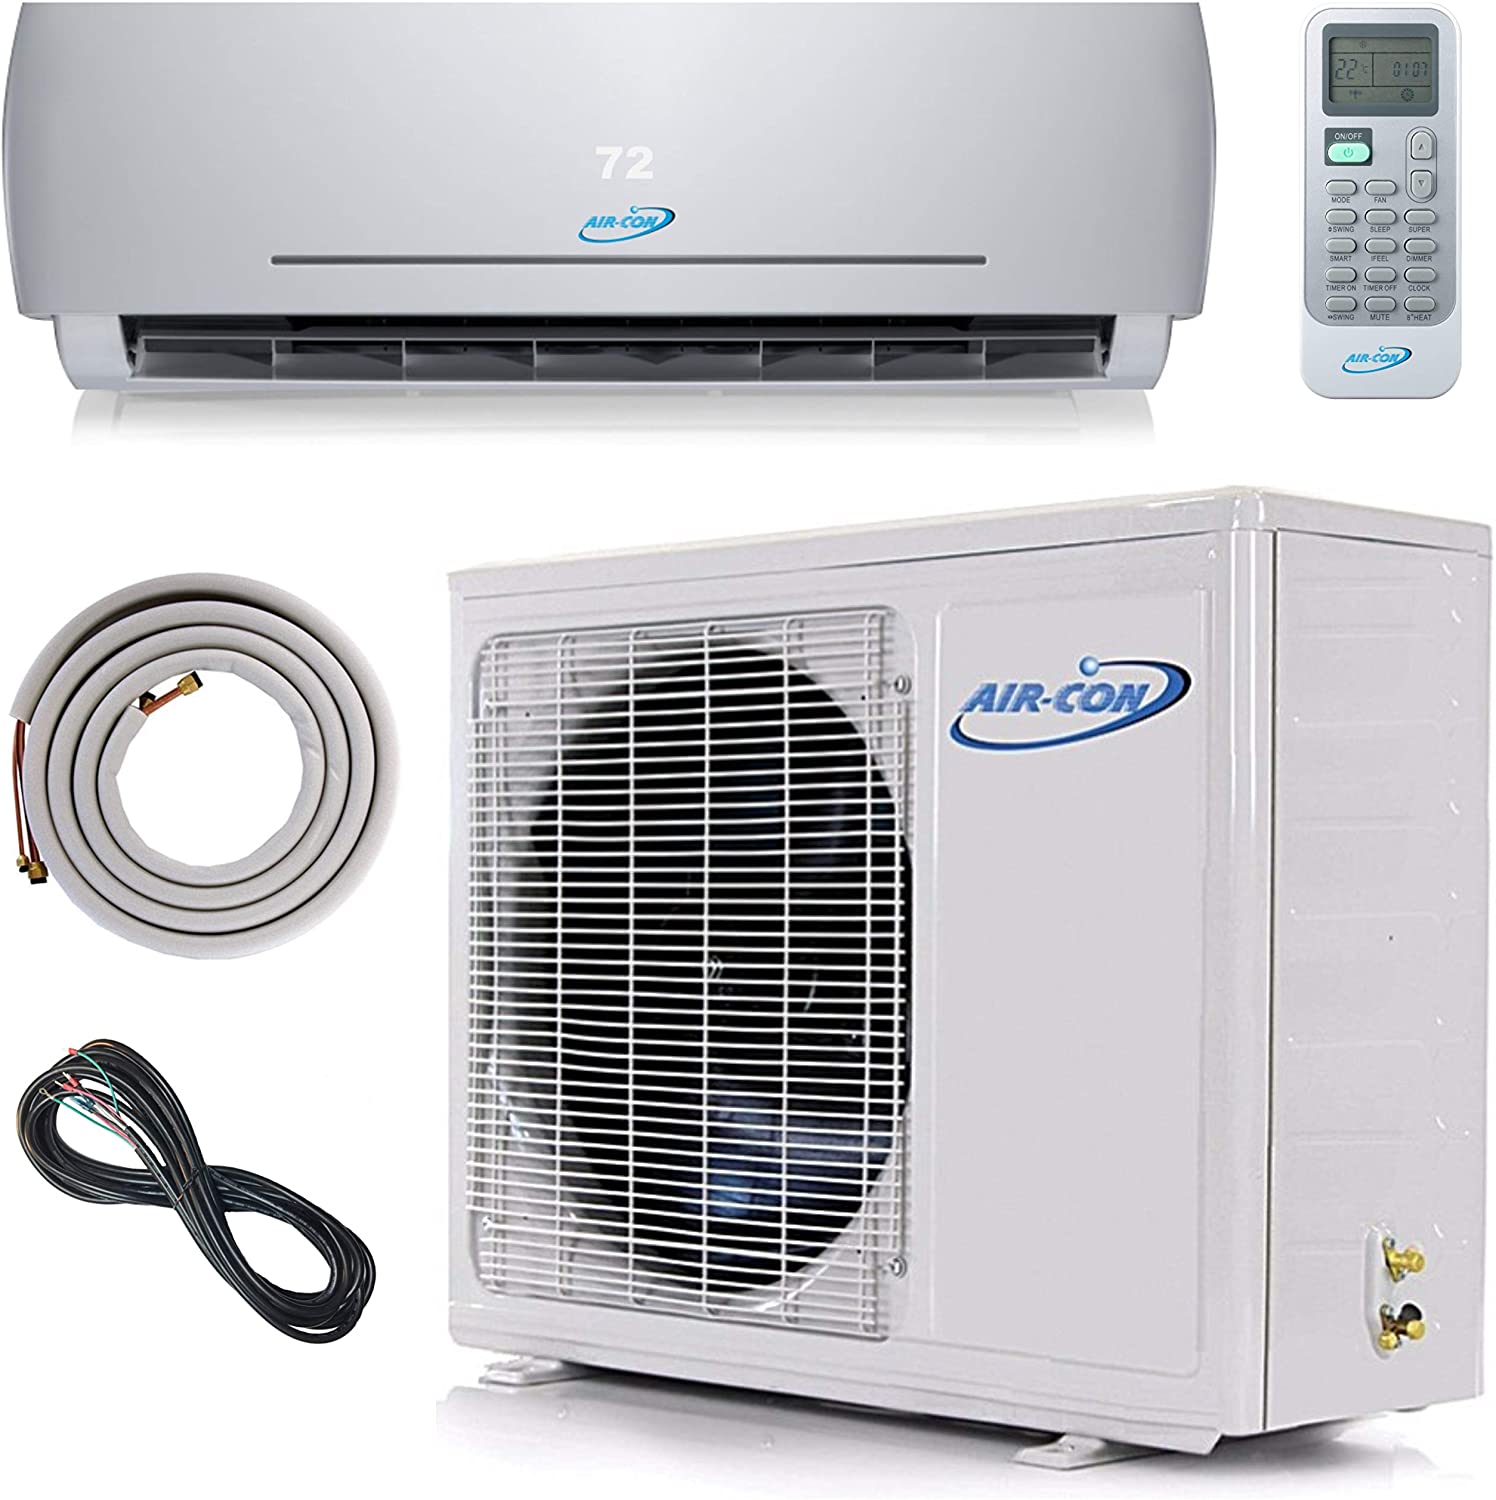 Air-Con Blue Series 3 12,000 BTU 20 SEER Single Zone Ductless Mini Split Air Conditioner and Heater System